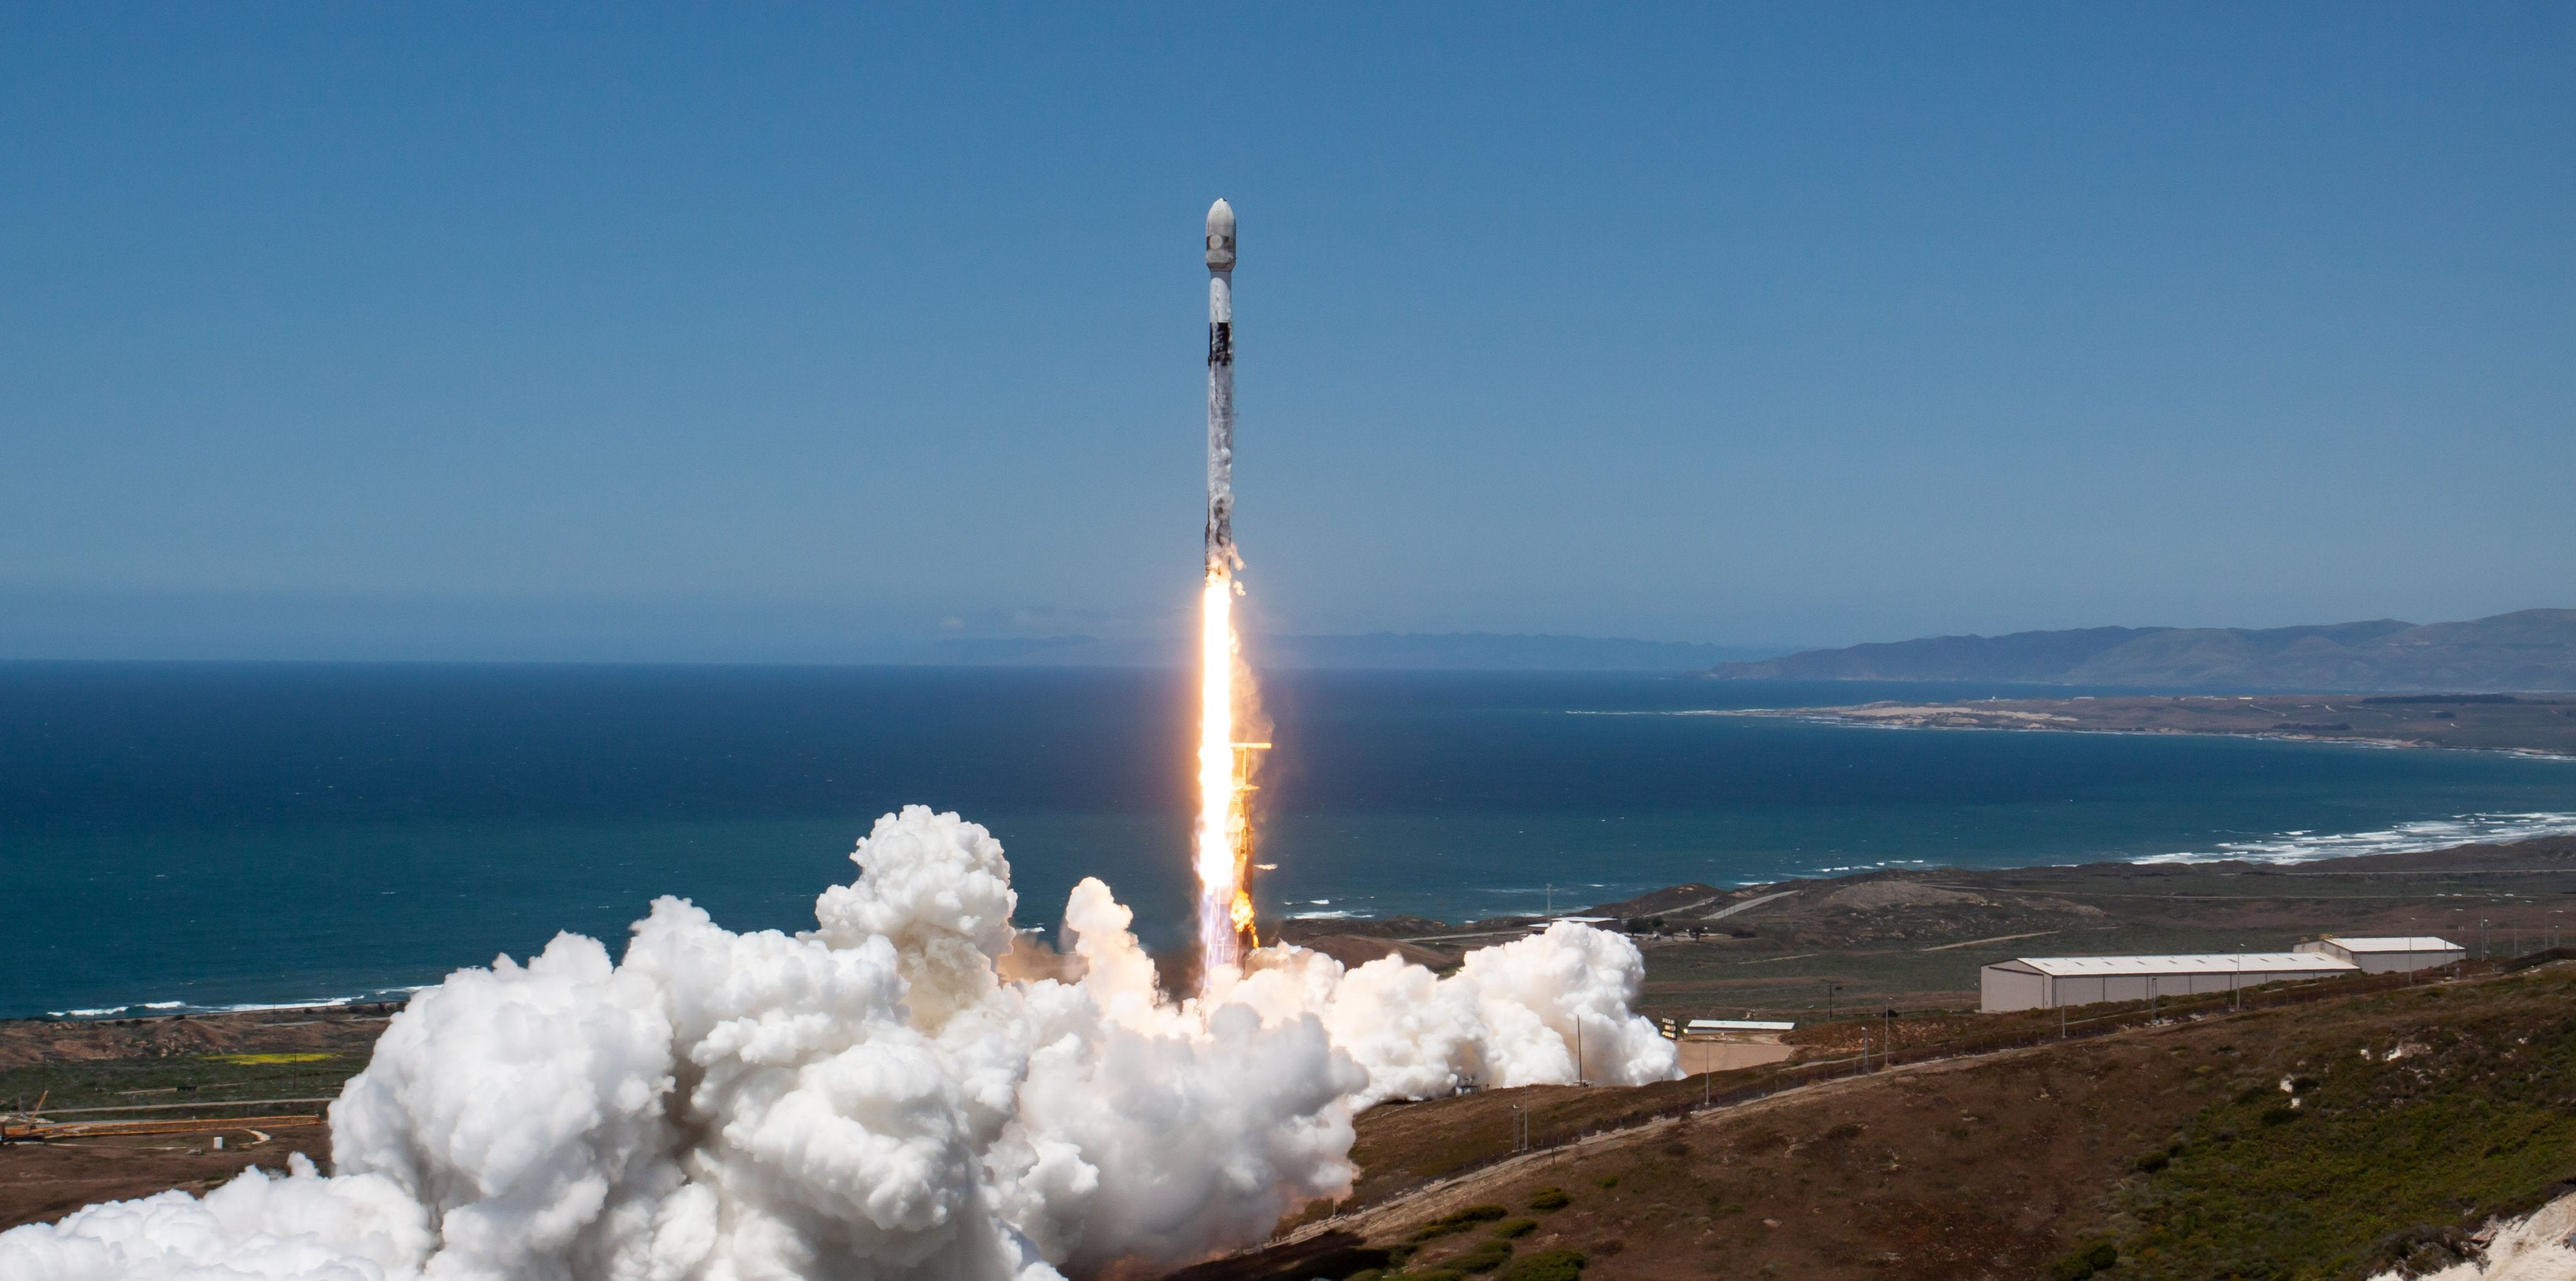 SpaceX Falcon 9 lifts off from Vandenberg Space Force Base to launch Starlink mission